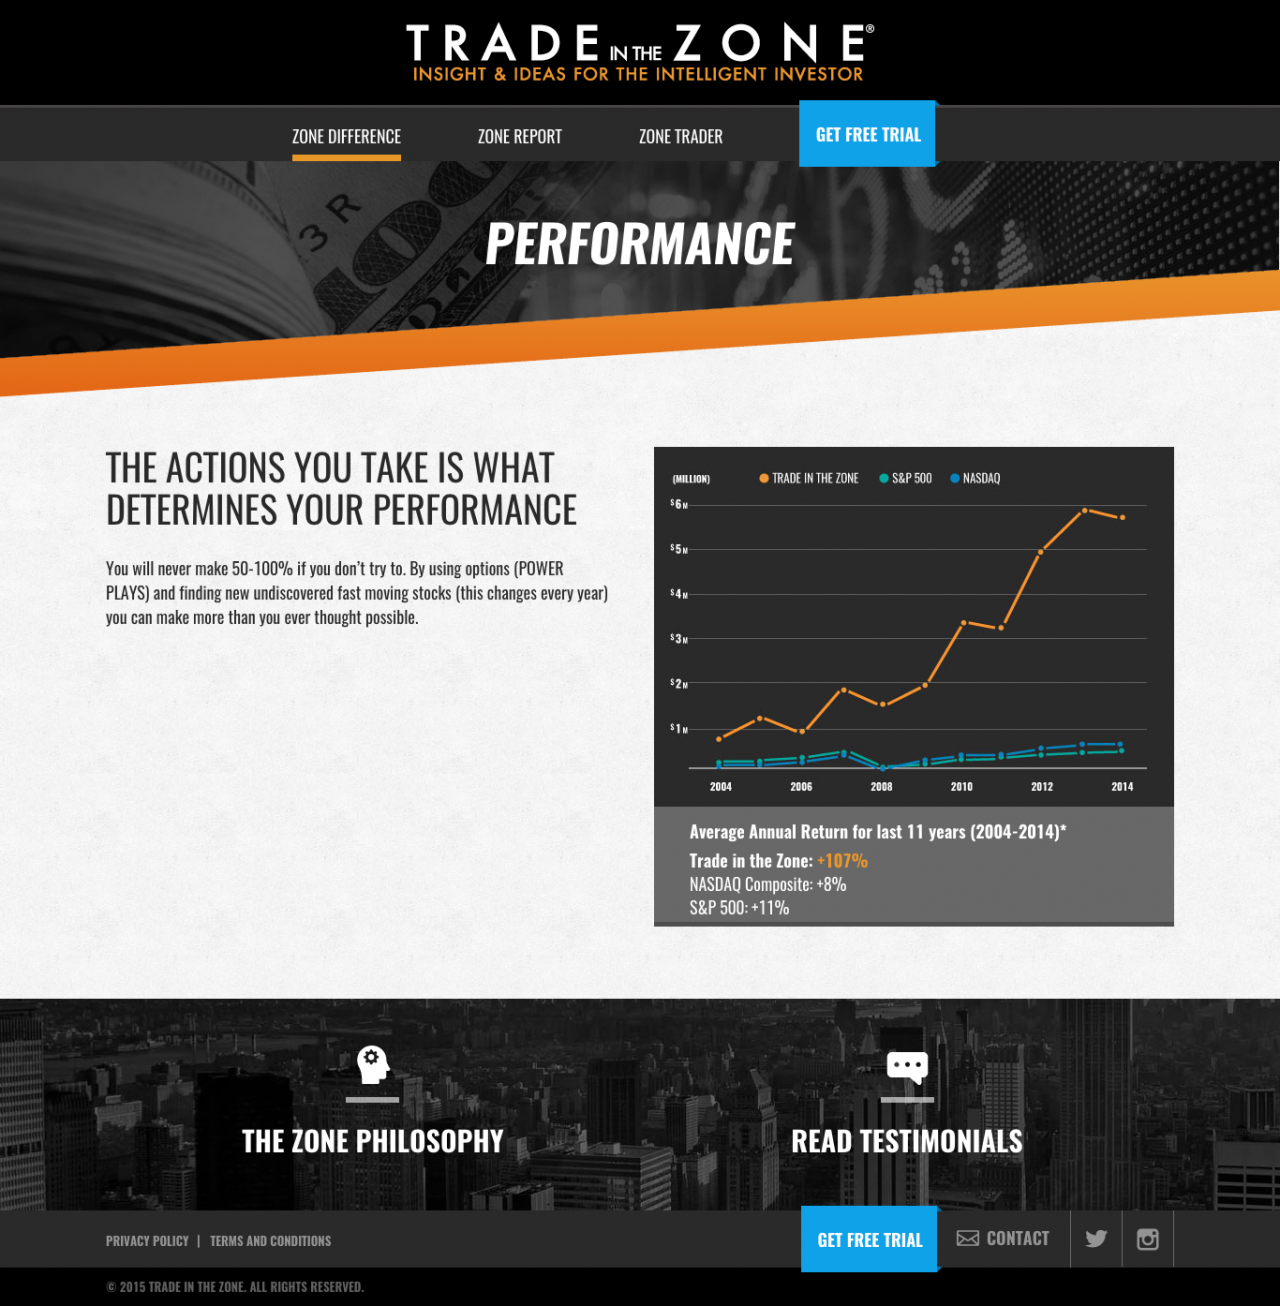 Trade in the Zone Image